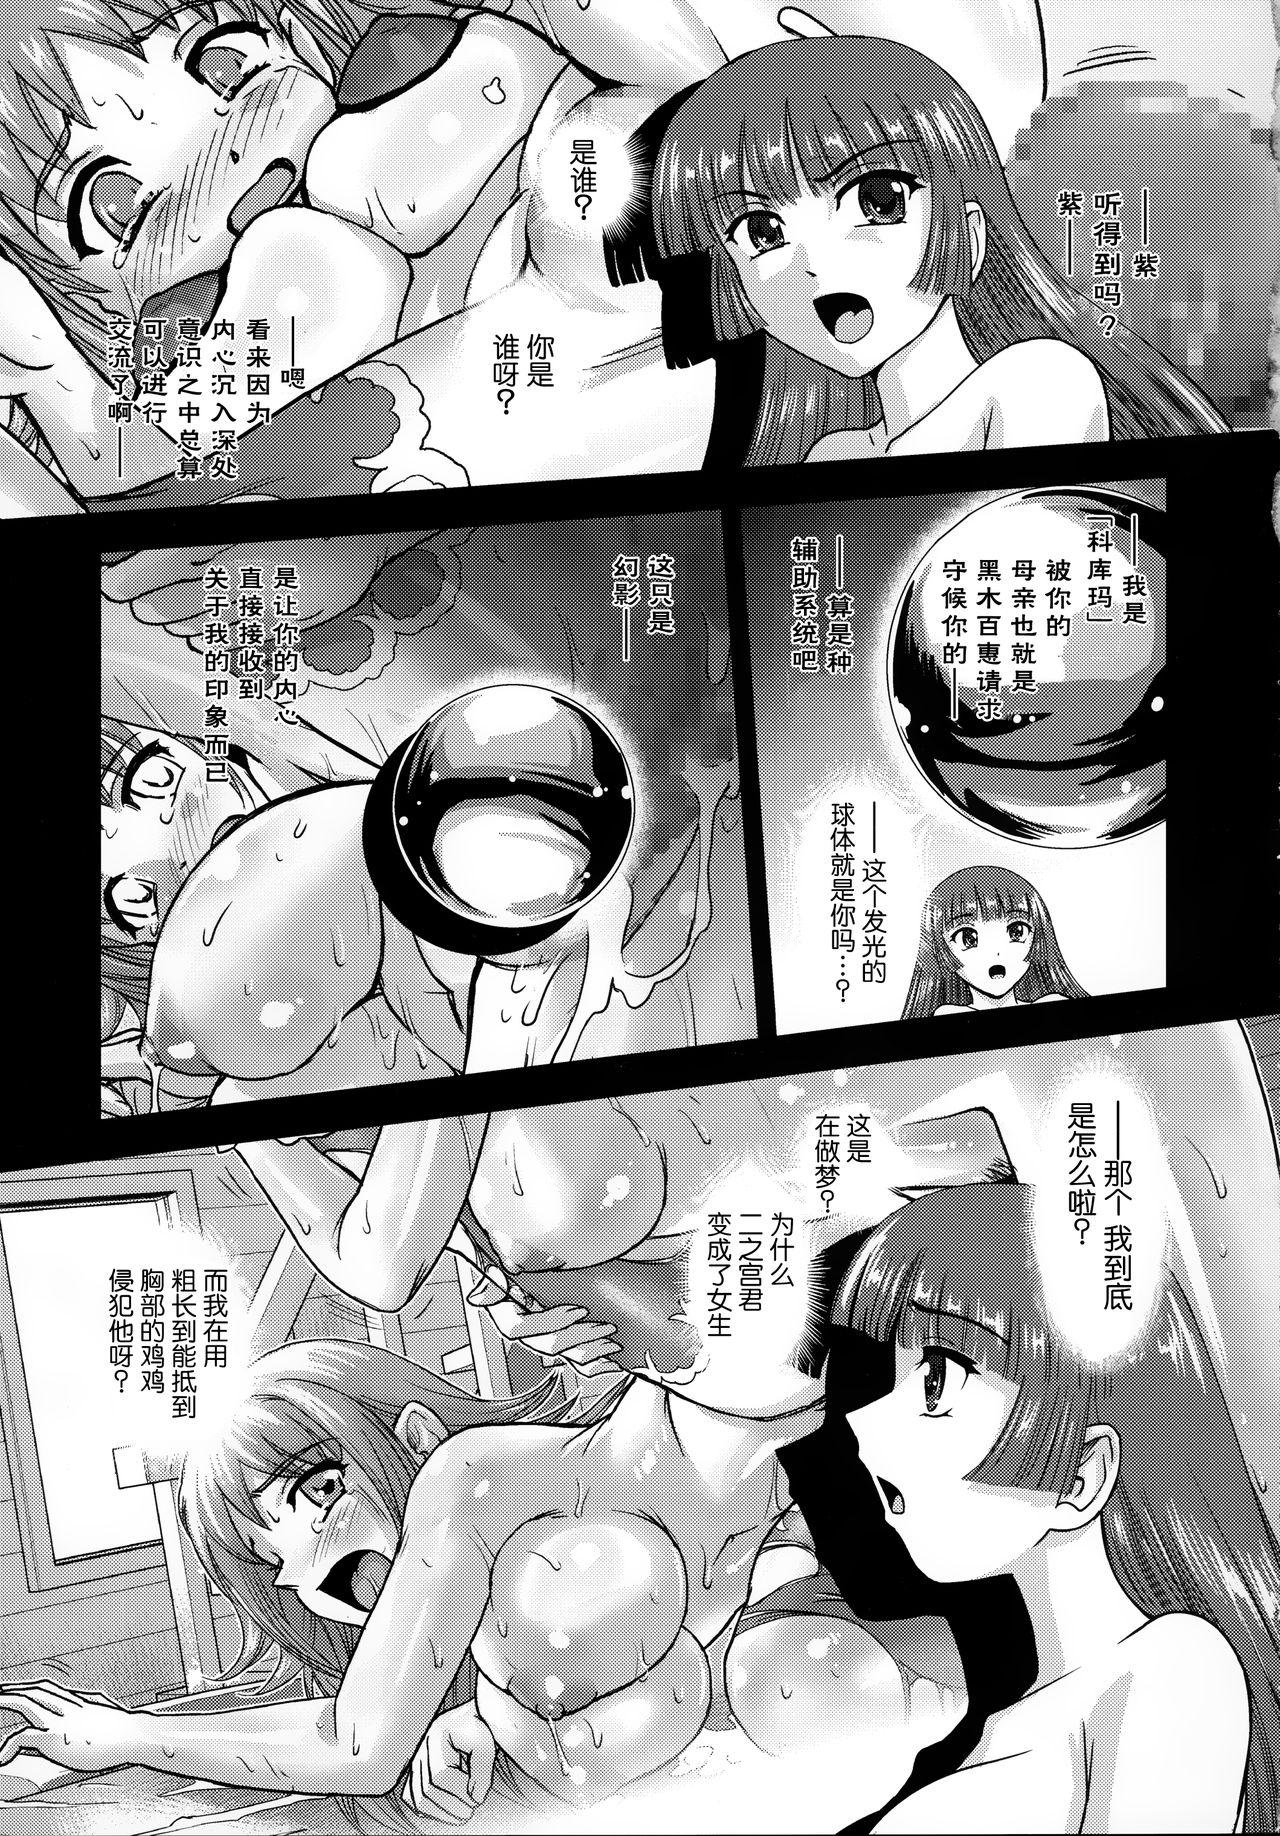 Old Young (C95) [Behind Moon (Dulce-Q)] DR:II ep.7 ~Dulce Report~ | 达西报告II Ep.7 [Chinese] [鬼畜王汉化组] - Original Sister - Page 5